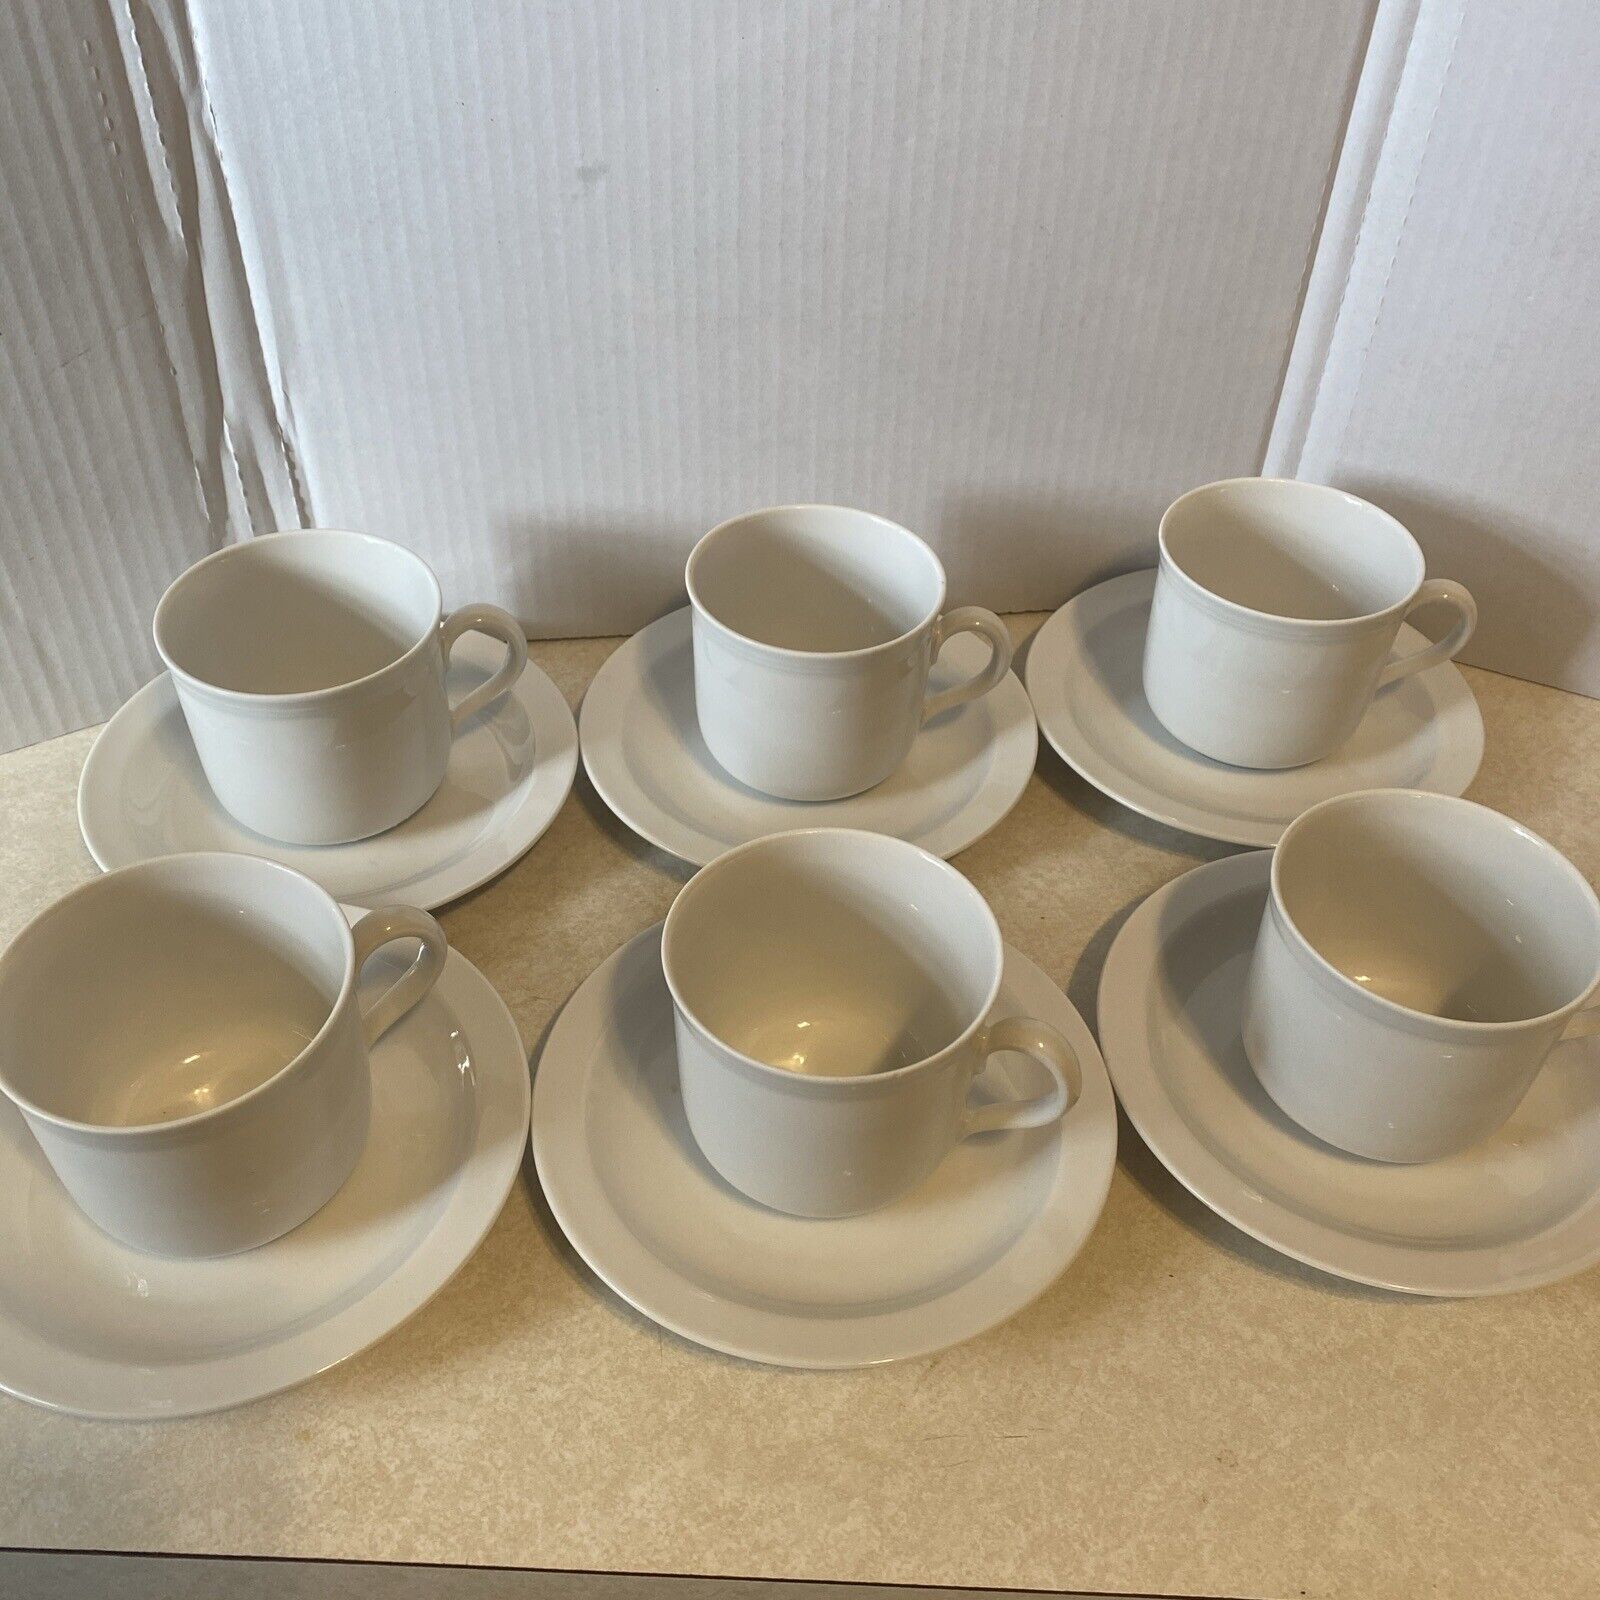 Vintage 6 Sets Seltmann Weiden Bavaria White Cups and Saucers 12 Pieces Total